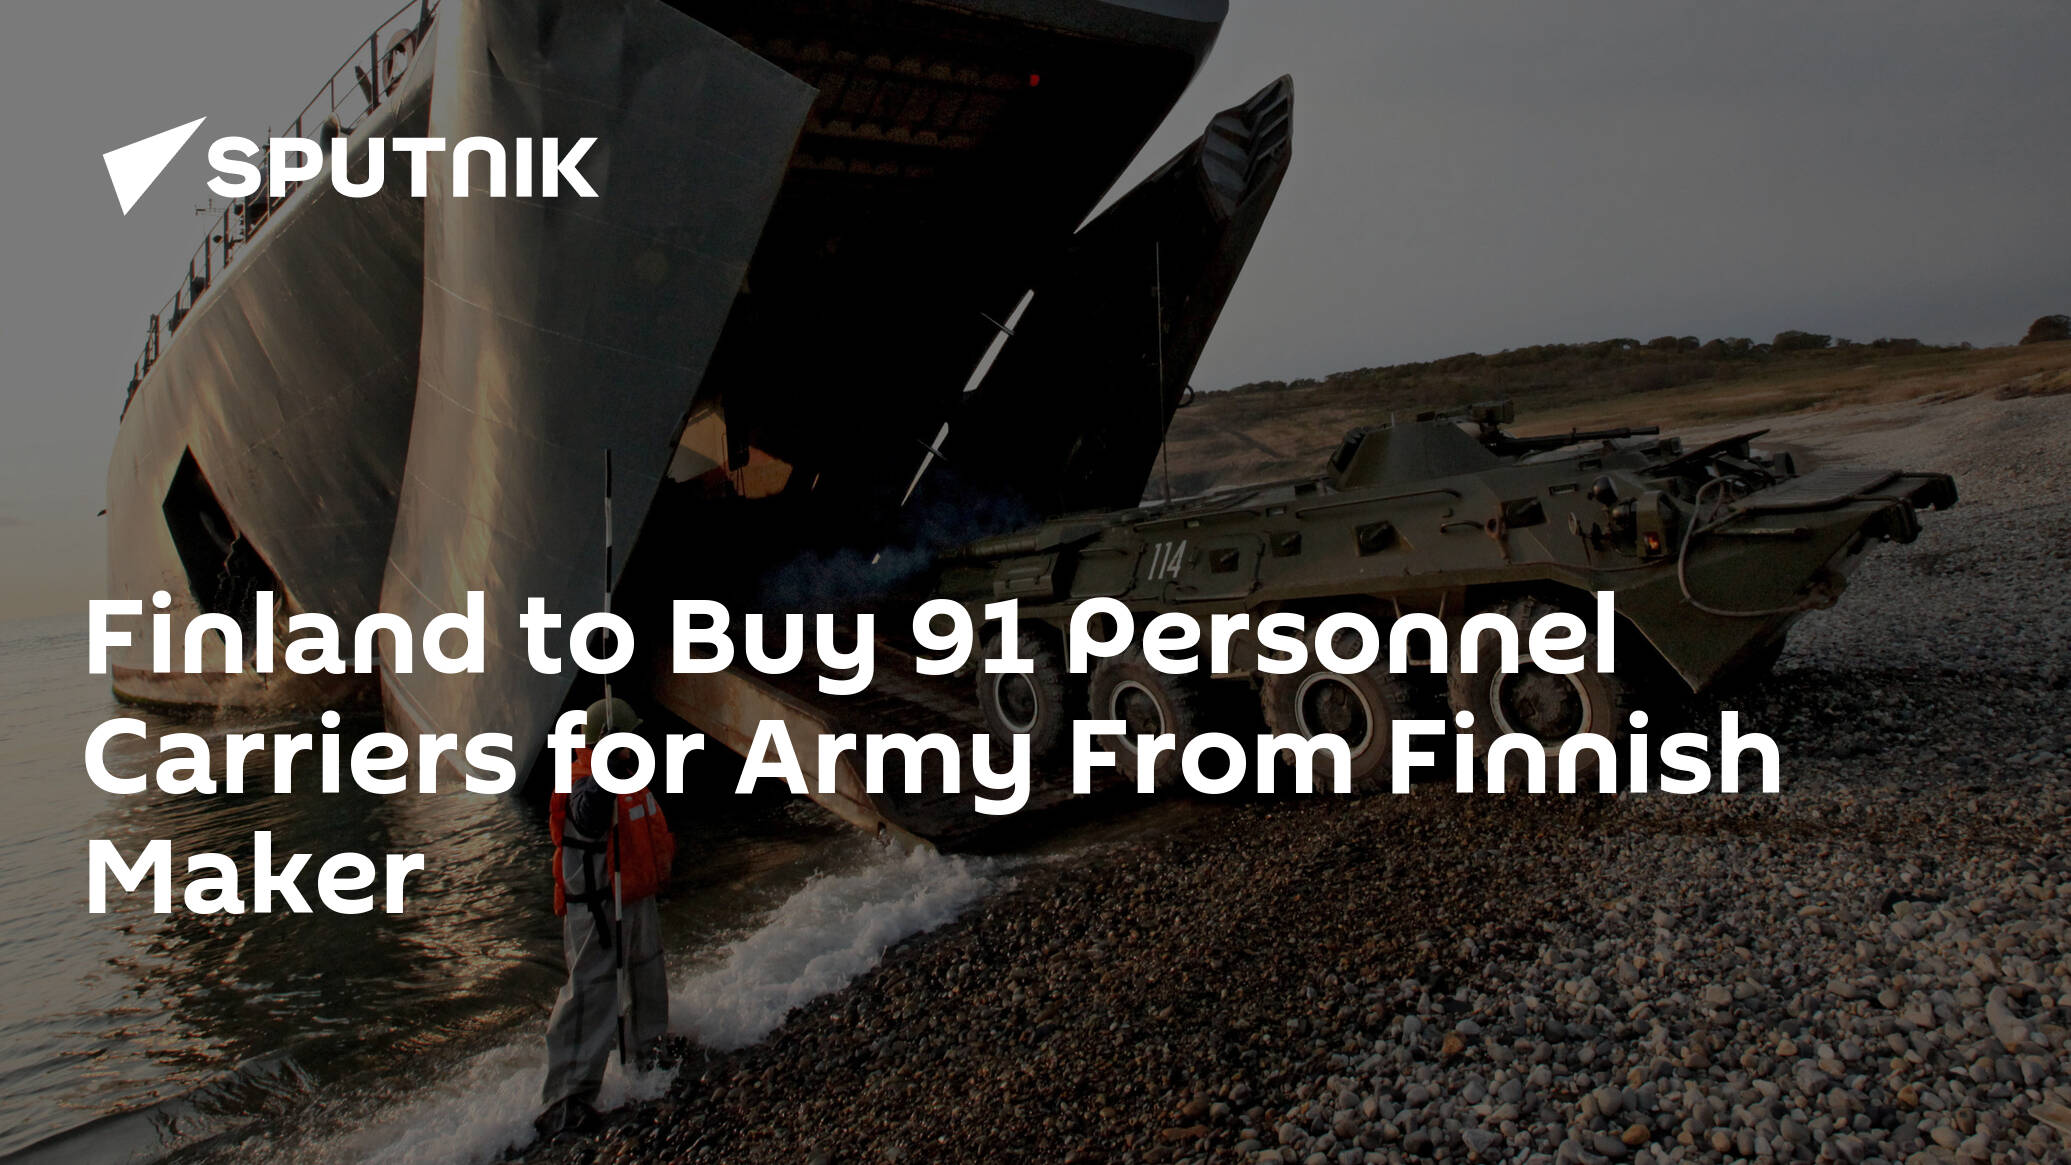 Finland to Buy 91 Personnel Carriers for Army From Finnish Maker